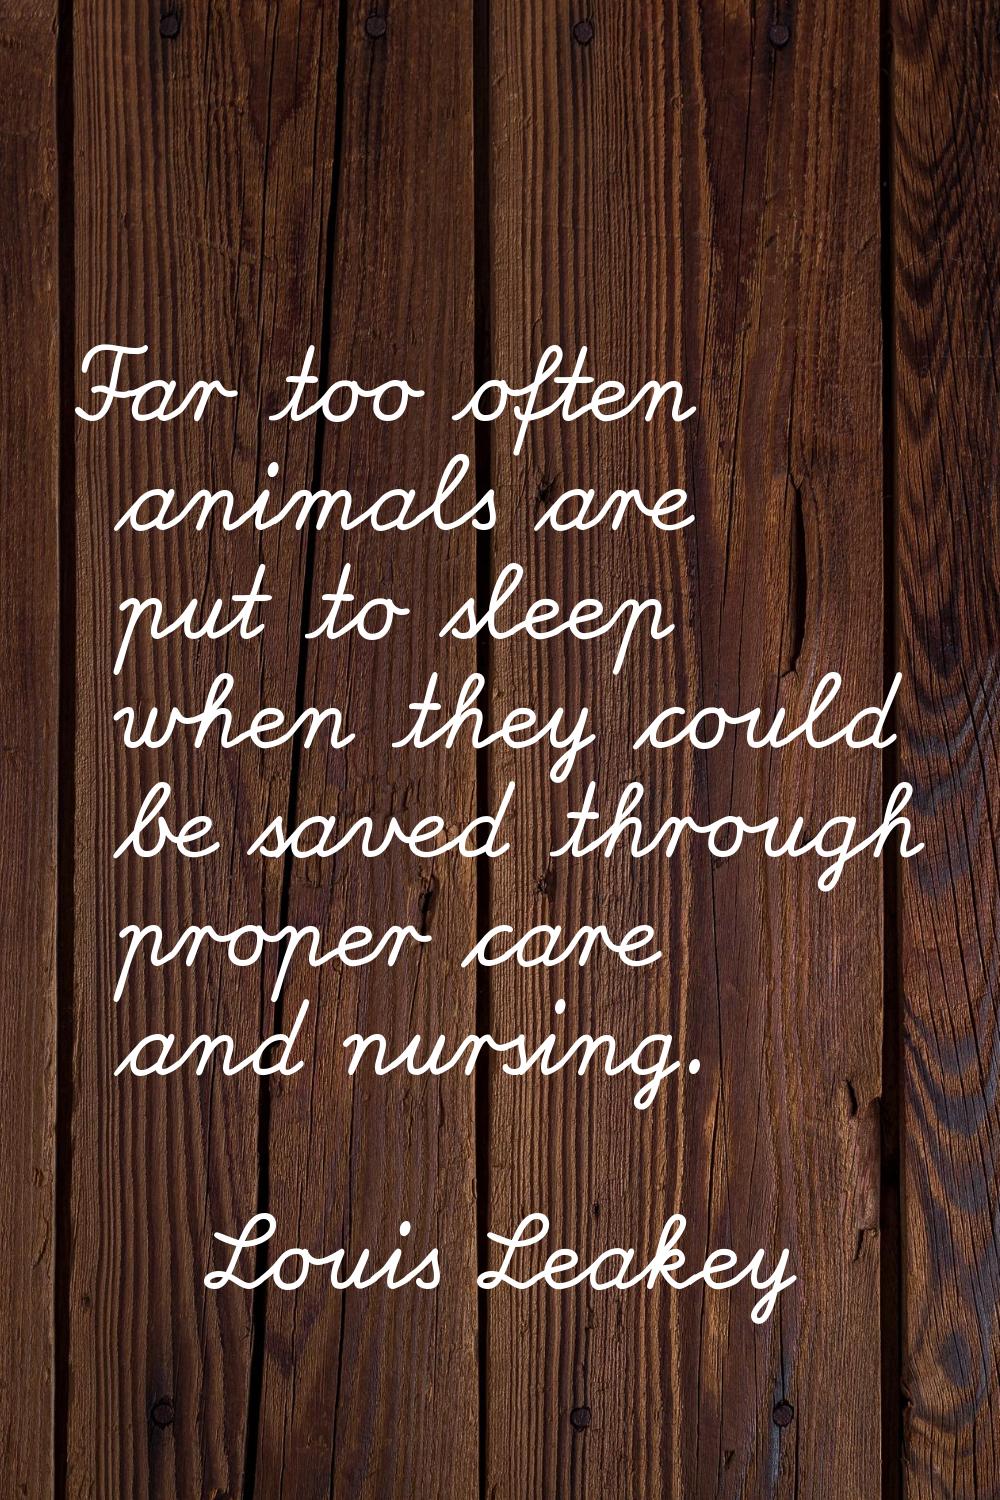 Far too often animals are put to sleep when they could be saved through proper care and nursing.